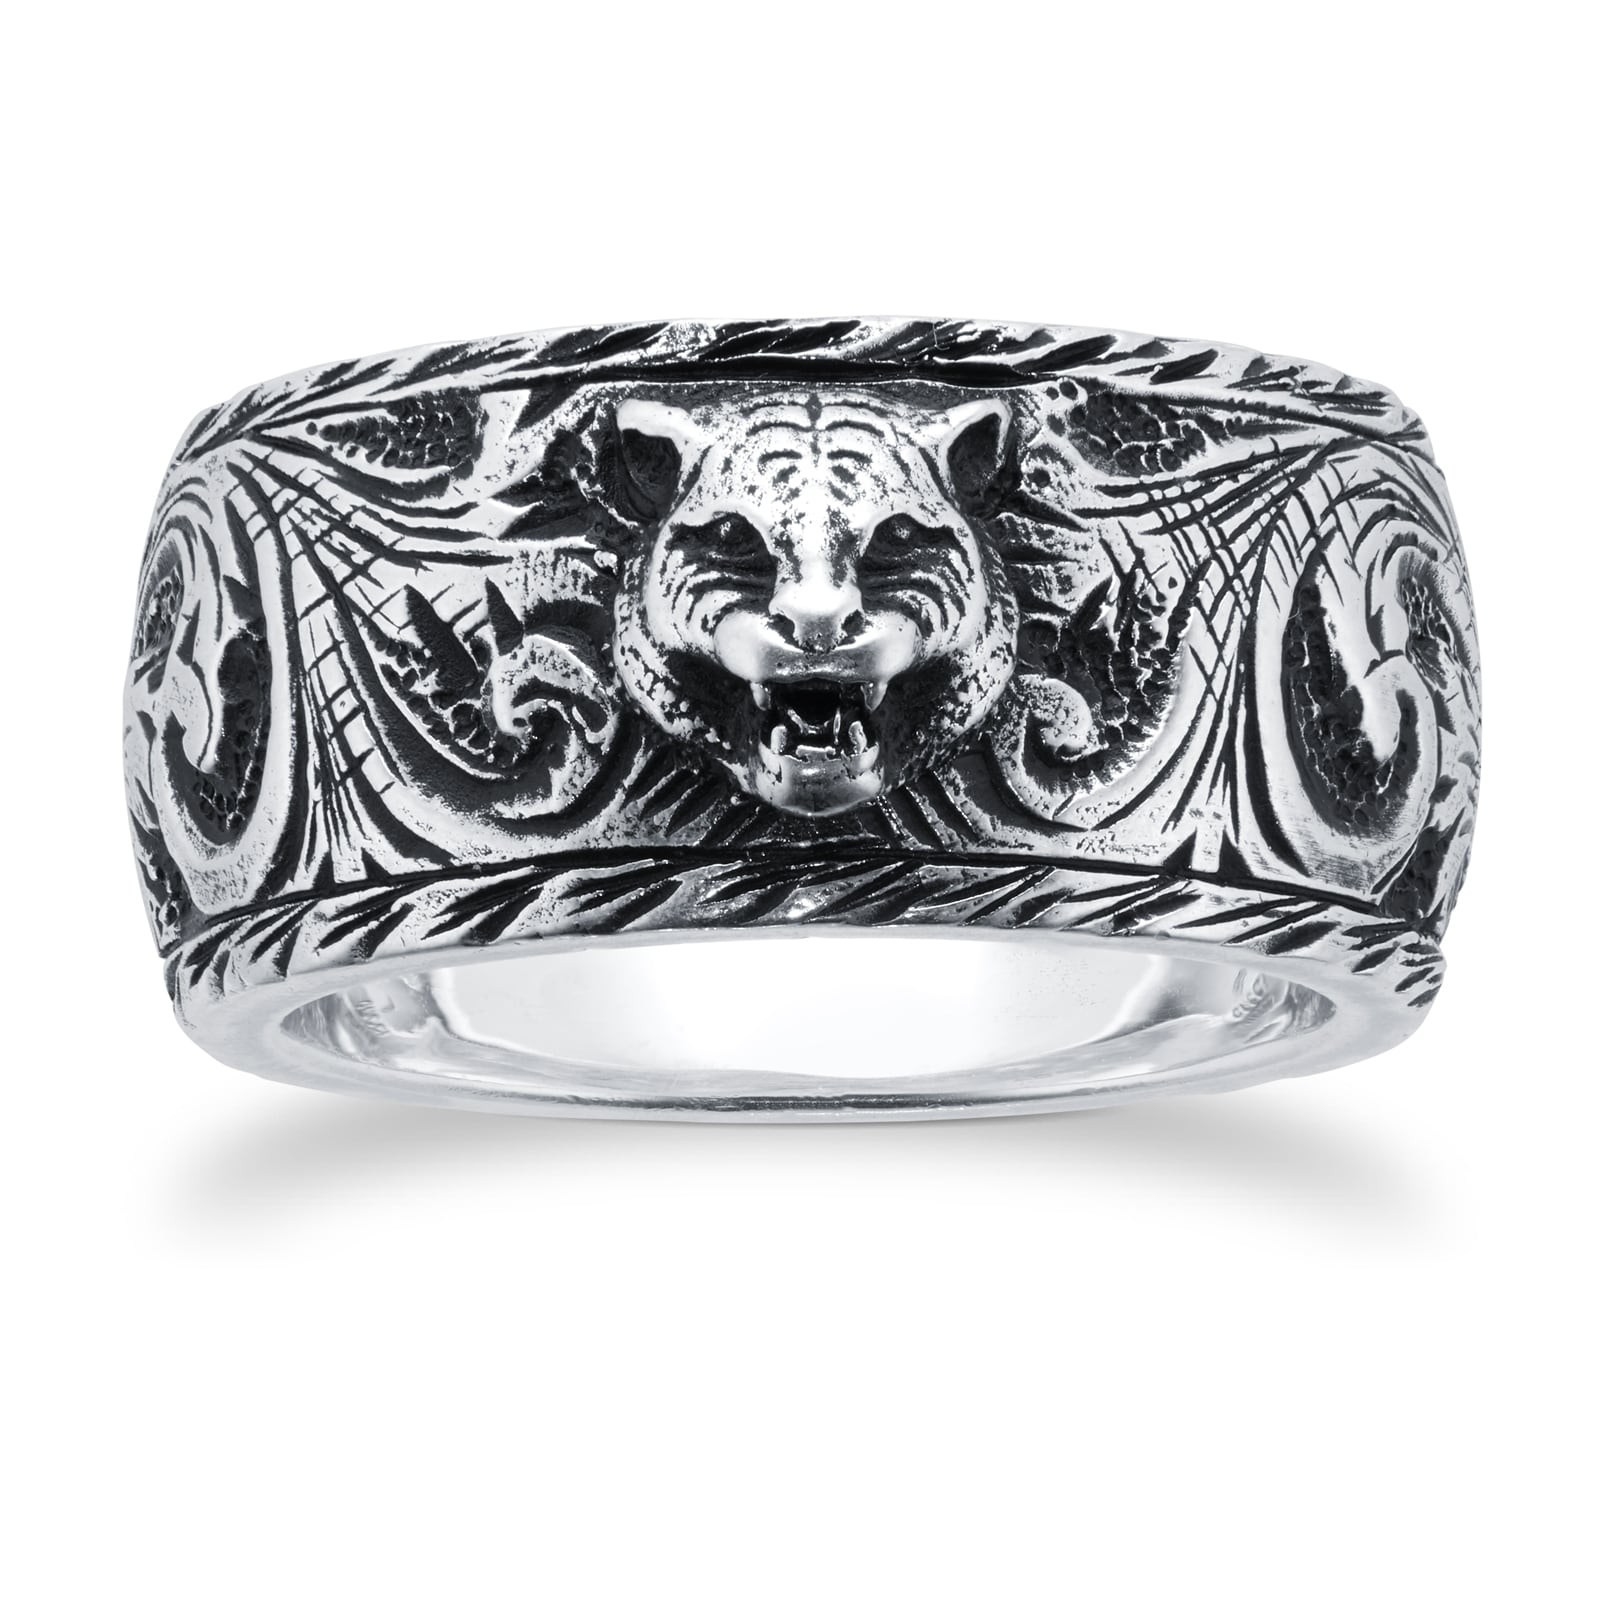 Gatto Thin Silver 10mm Ring With Feline Head - Ring Size M